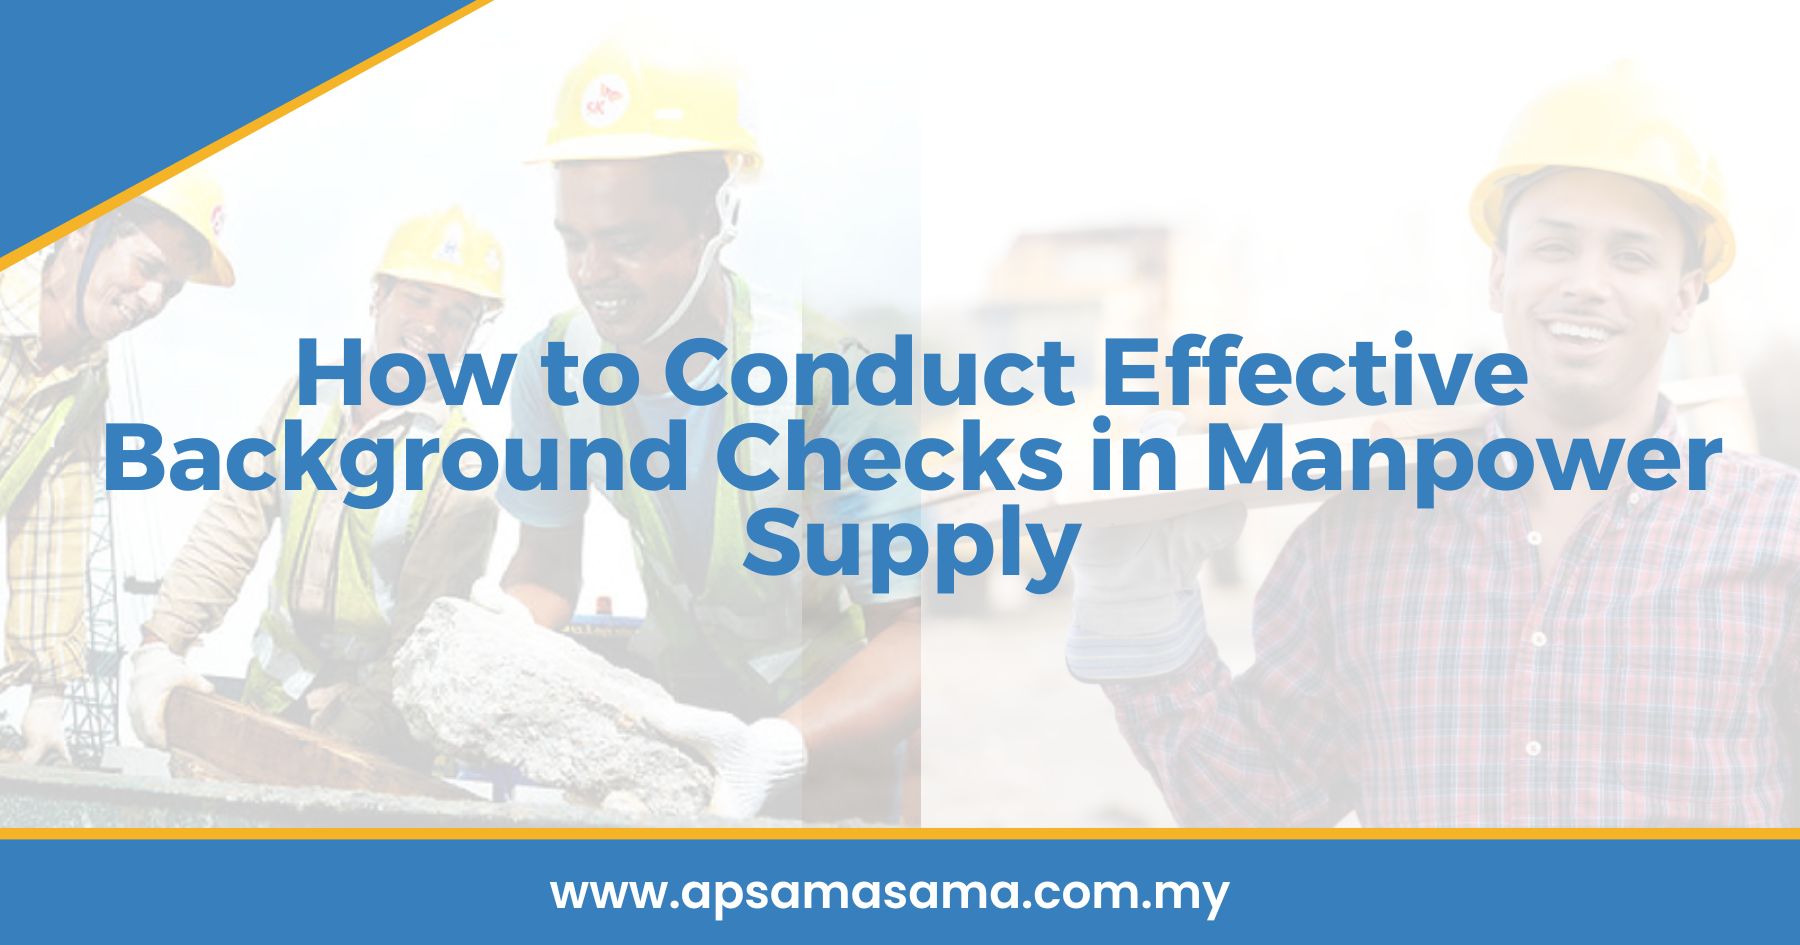 How to Conduct Effective Background Checks in Manpower Supply